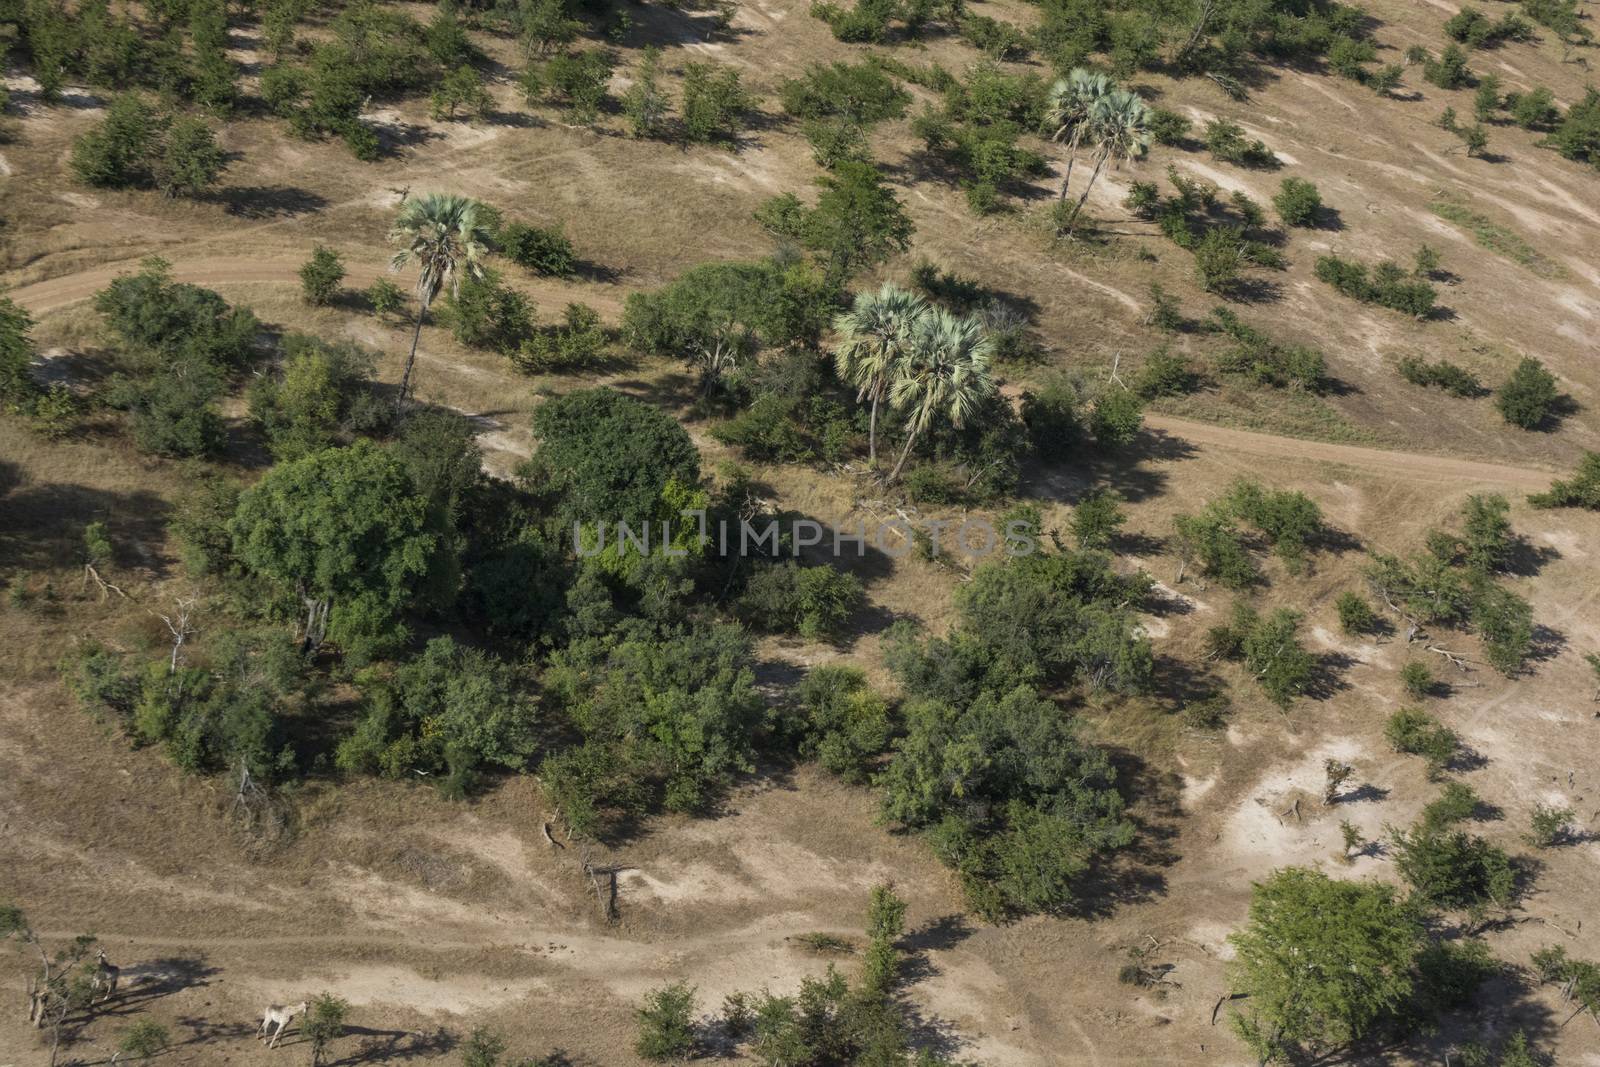 Zambian savannah view from the sky